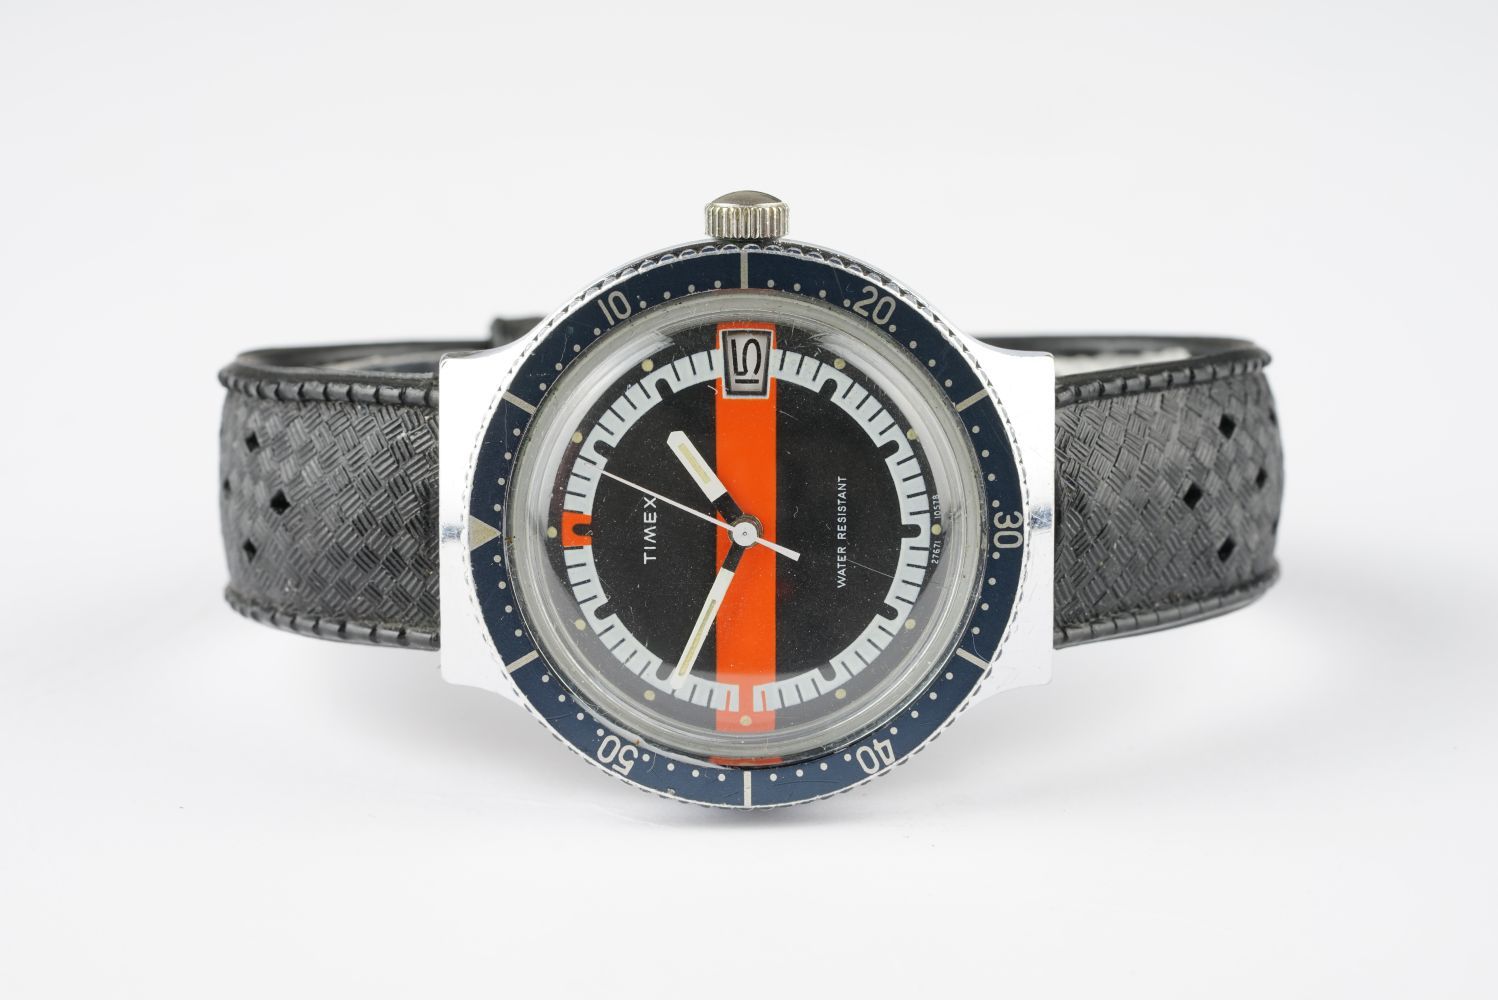 GENTLEMENS TIMEX DIVER DATE WRISTWATCH, circular black dial with orange accents, dot hour markers